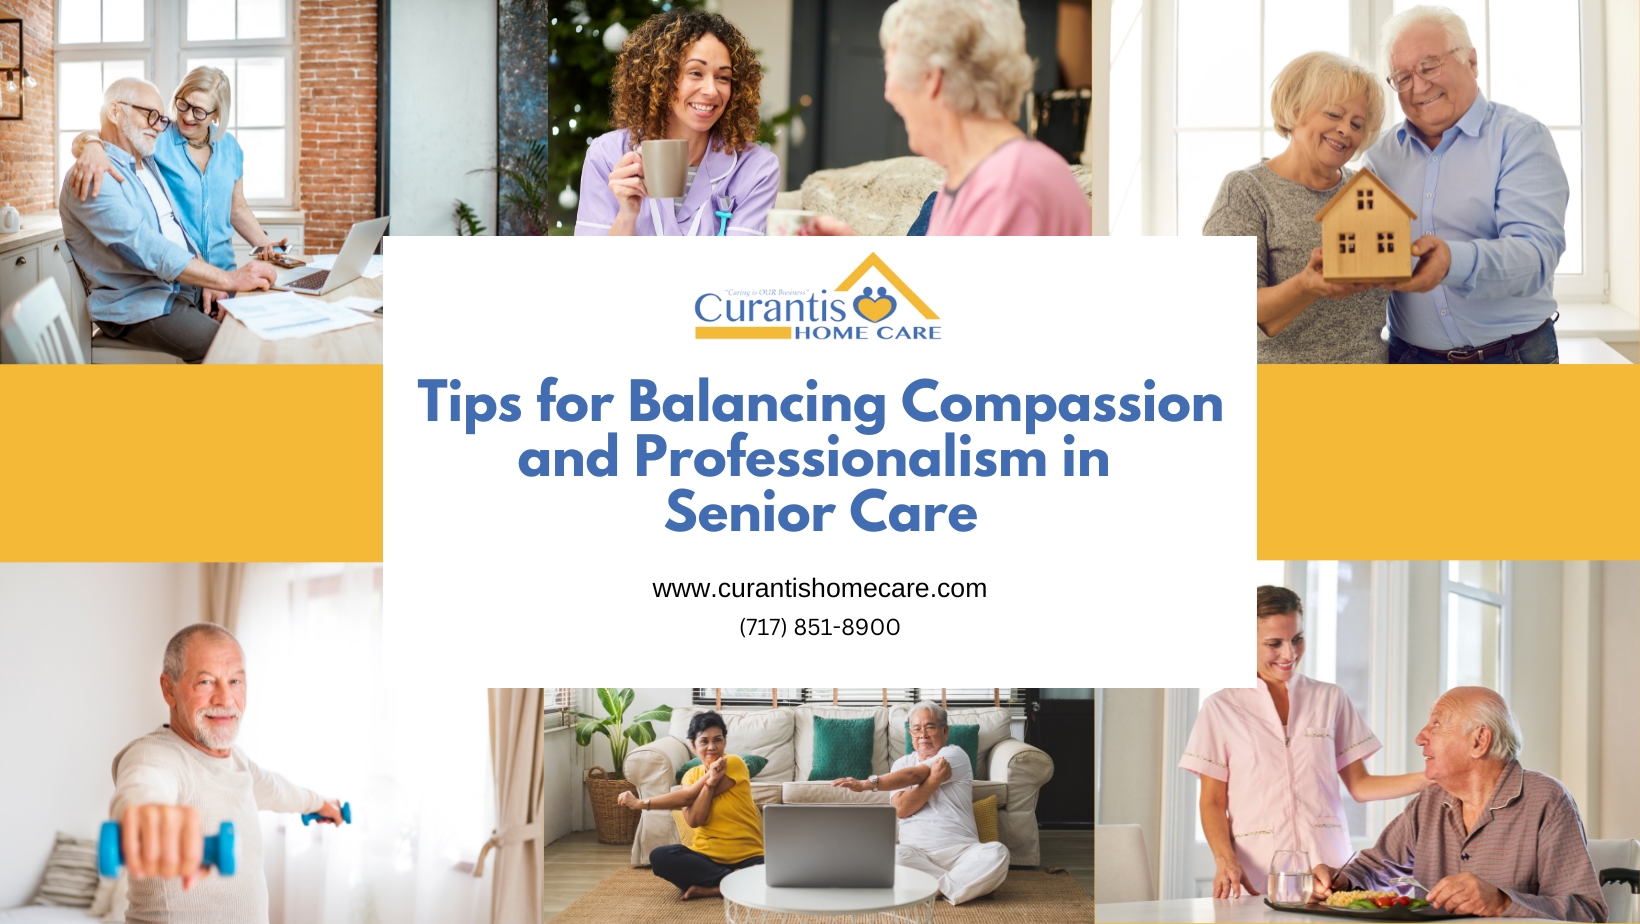 Tips for Balancing Compassion and Professionalism in Senior Care